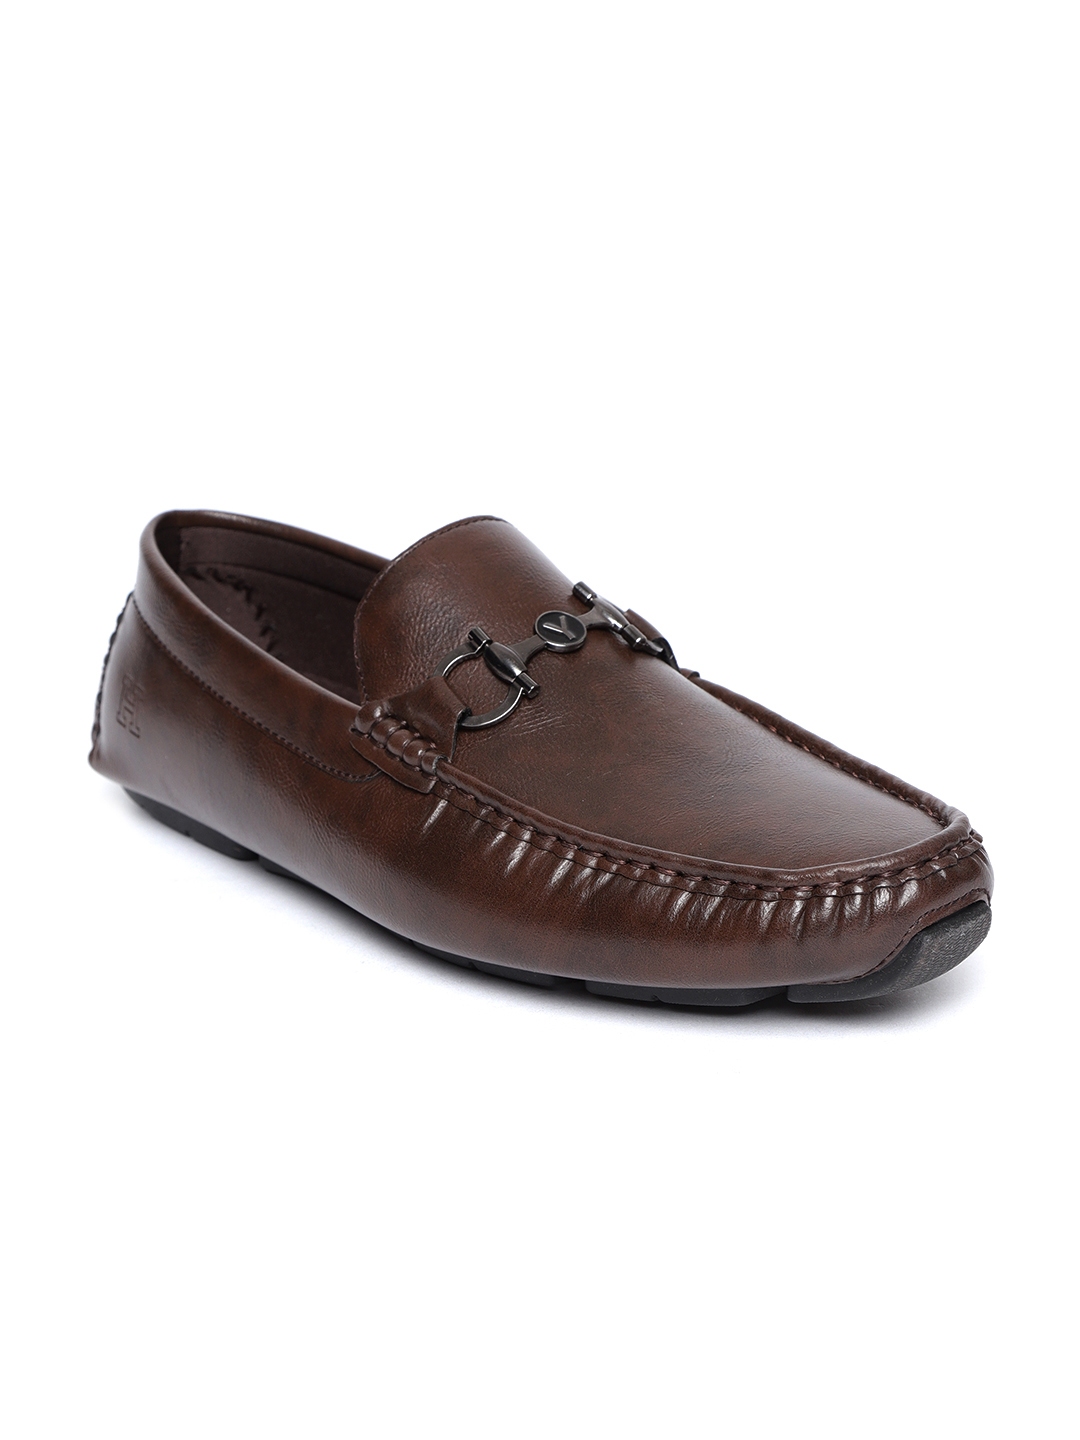 Buy Harvard Men Coffee Brown Driving Shoes - Casual Shoes for Men ...